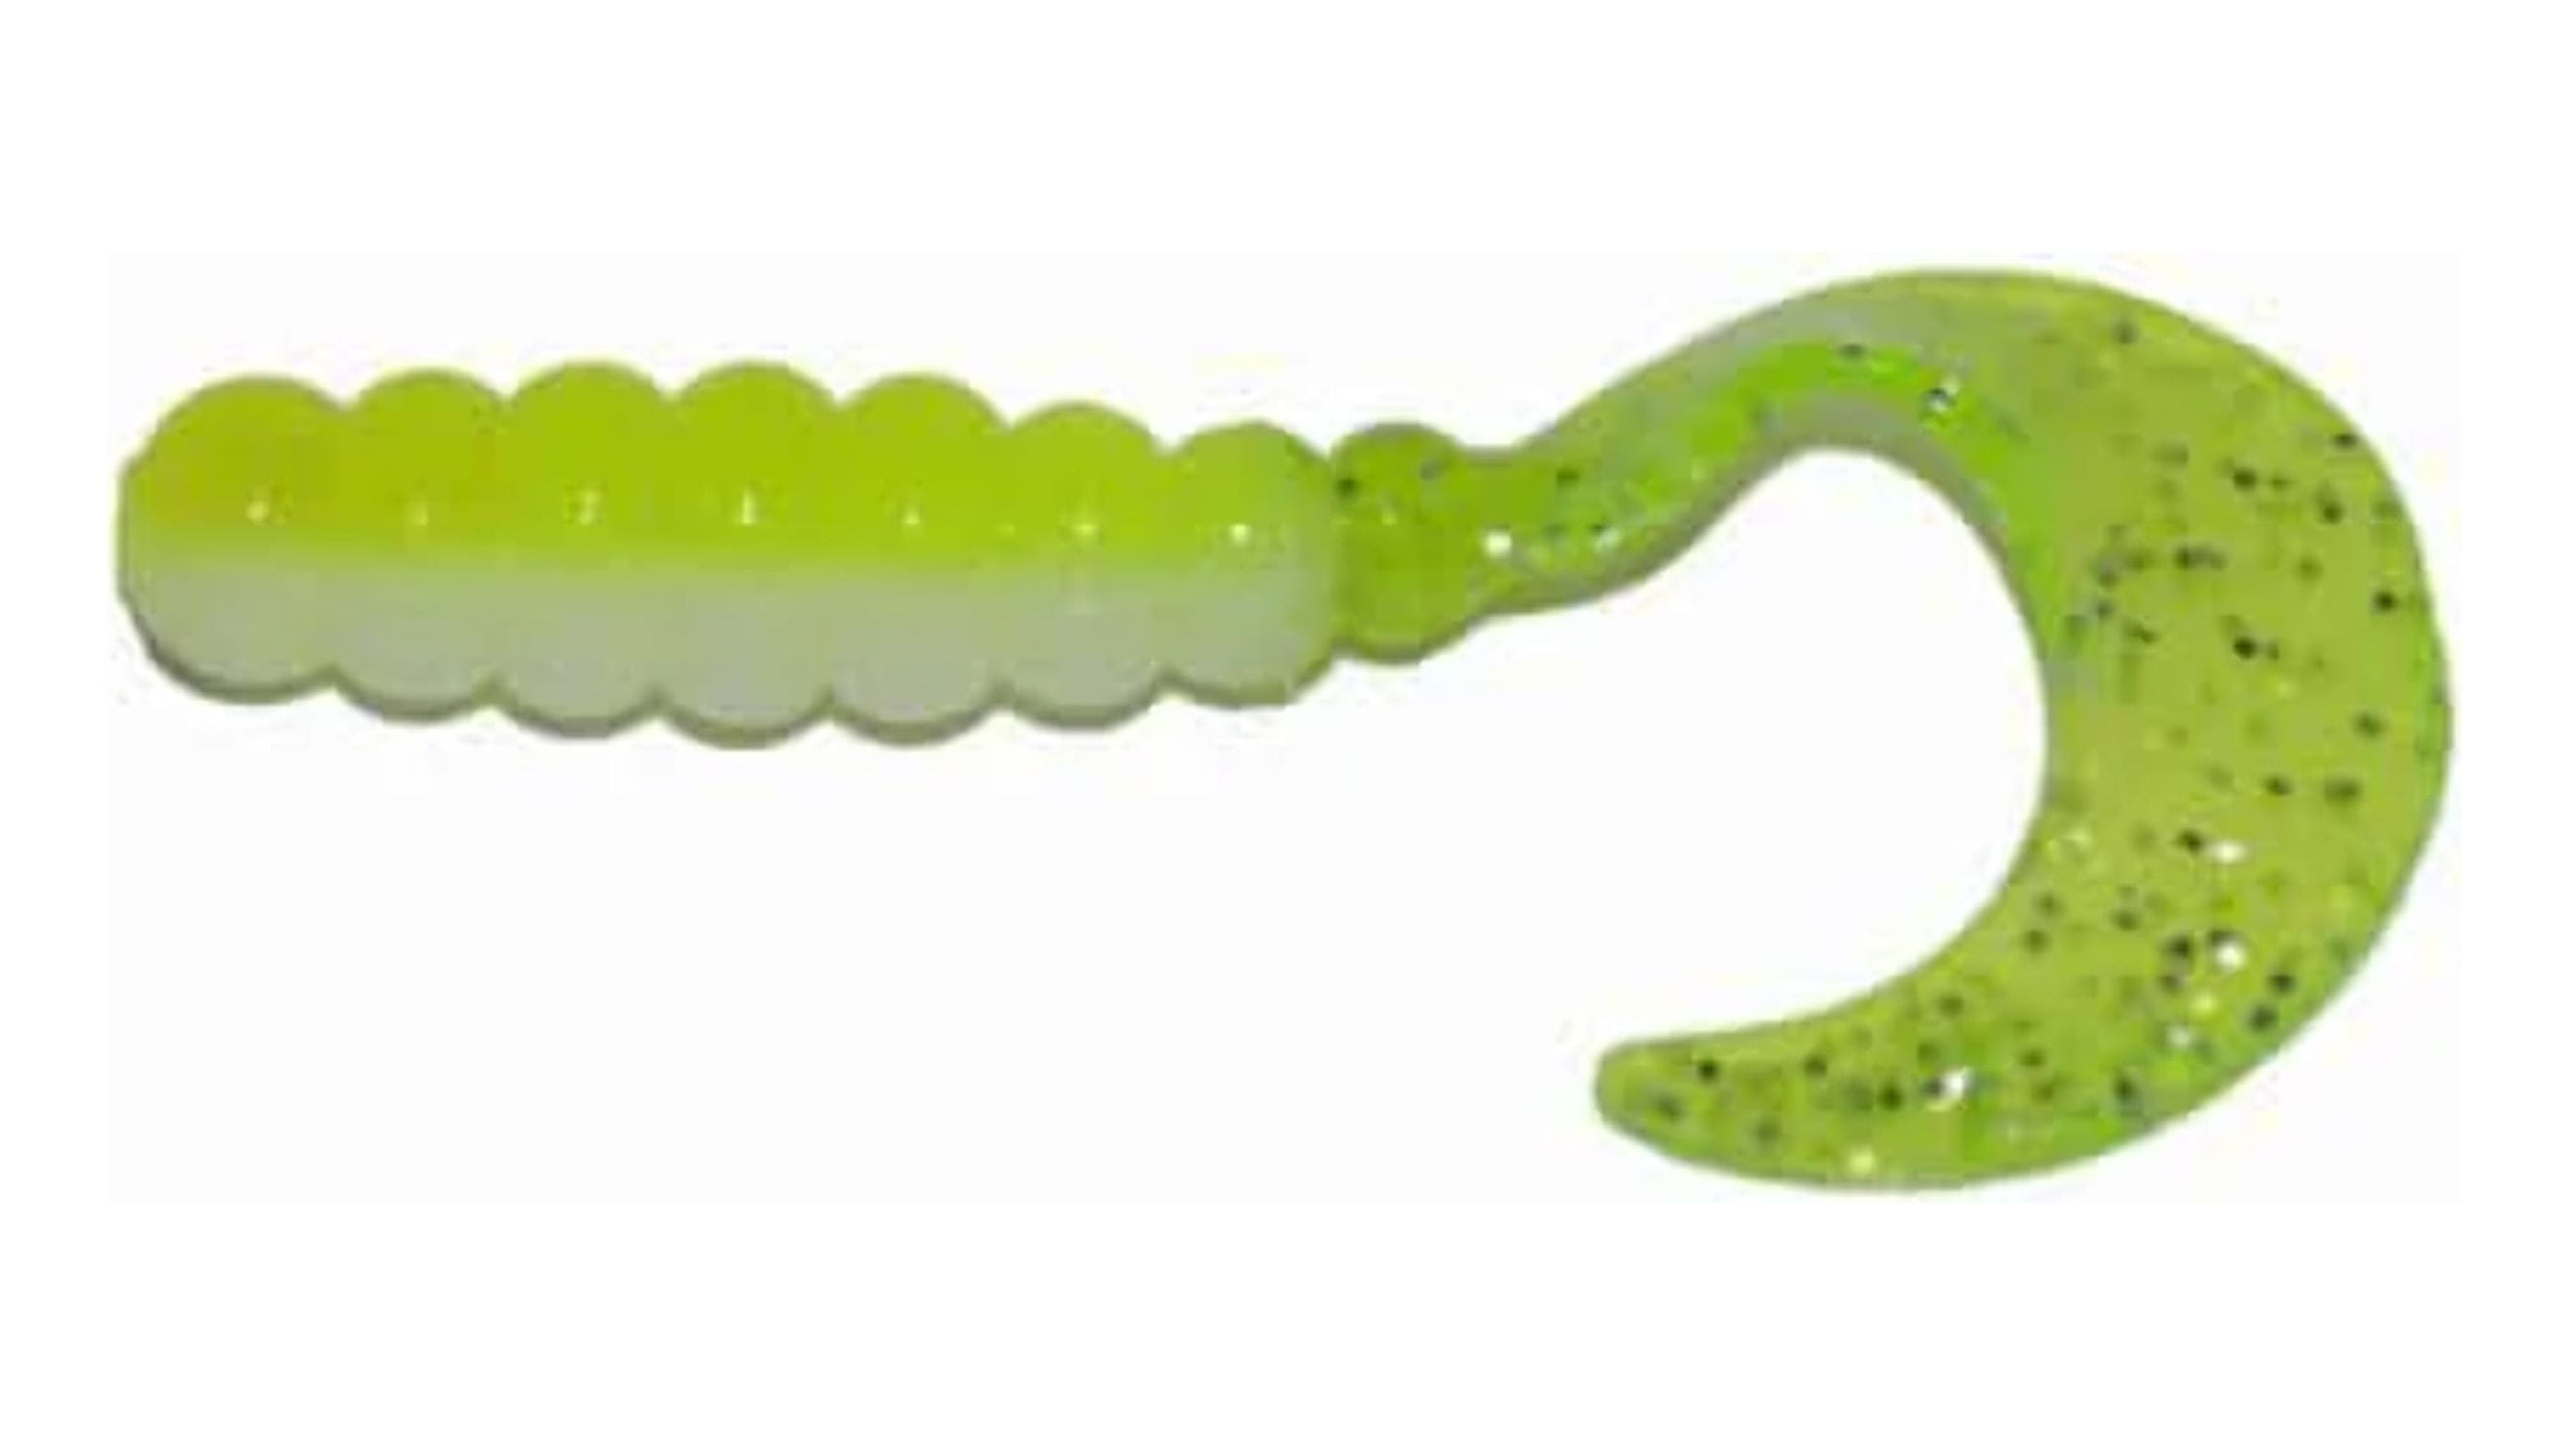 Big Bite Baits FG229 2 in. Fat Grub, Opaque Chartreuse - Pack of